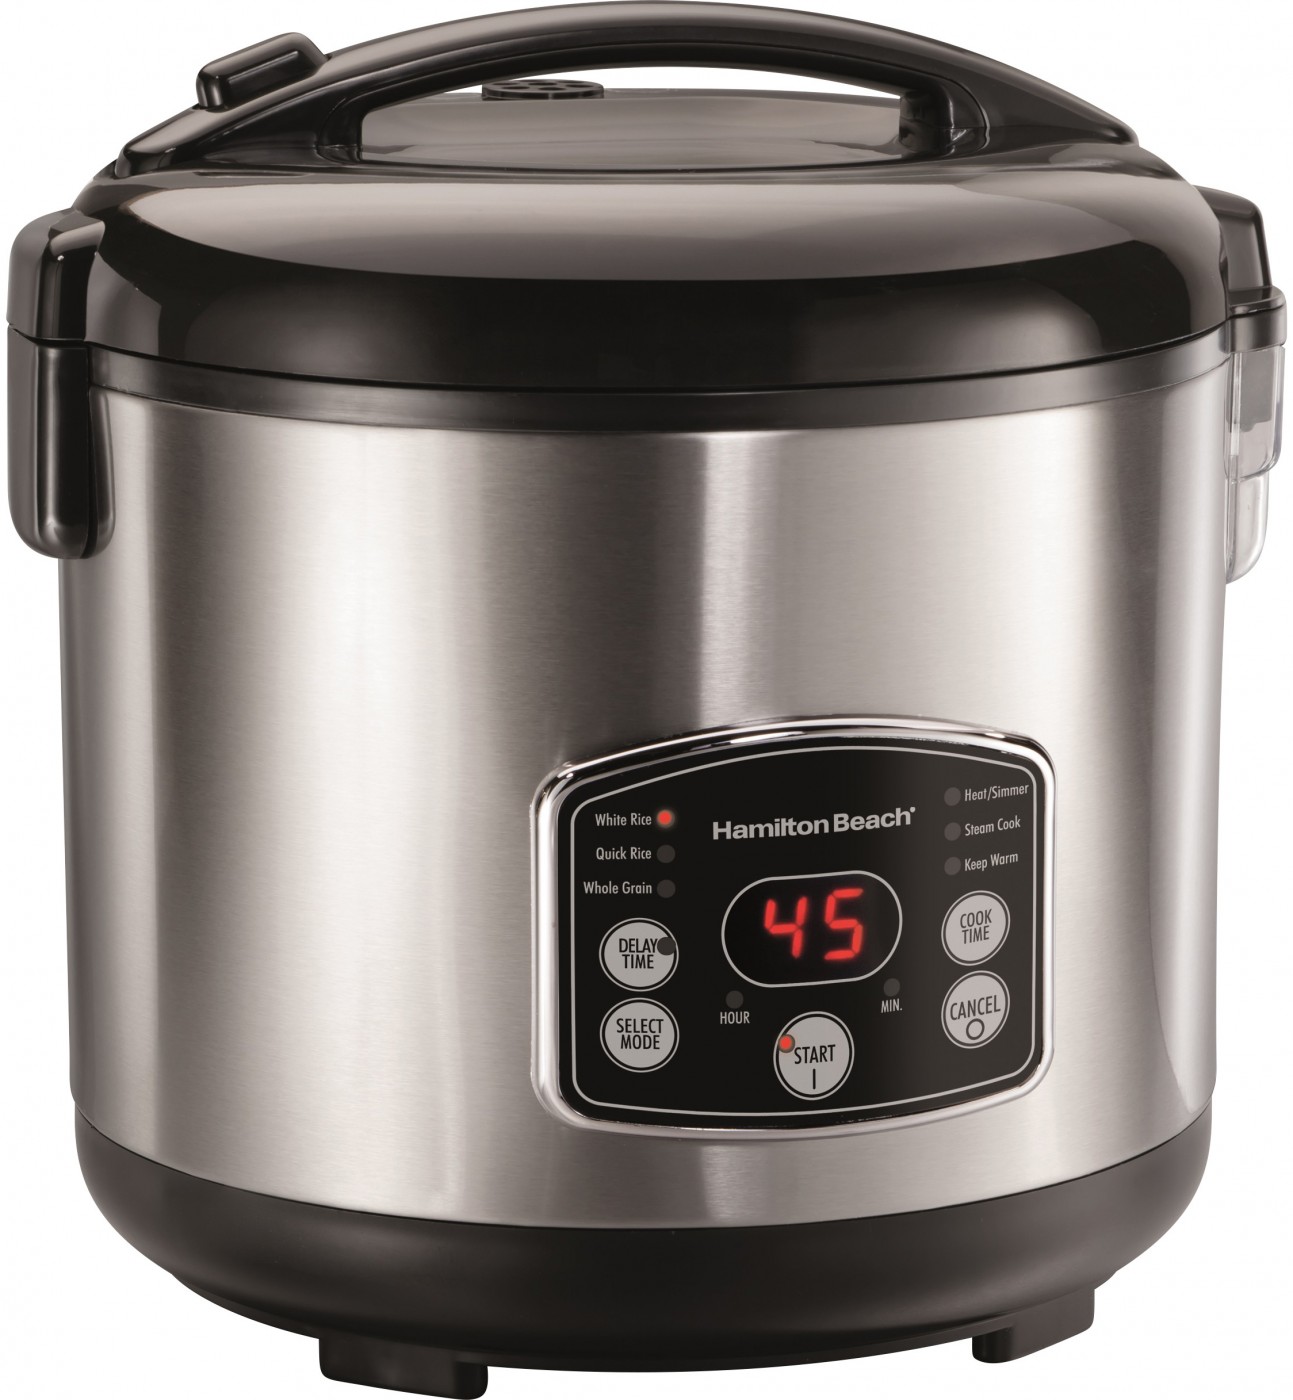 Eco-friendly non-stick 220V Rice Cooker with Keep warm MINICOOK